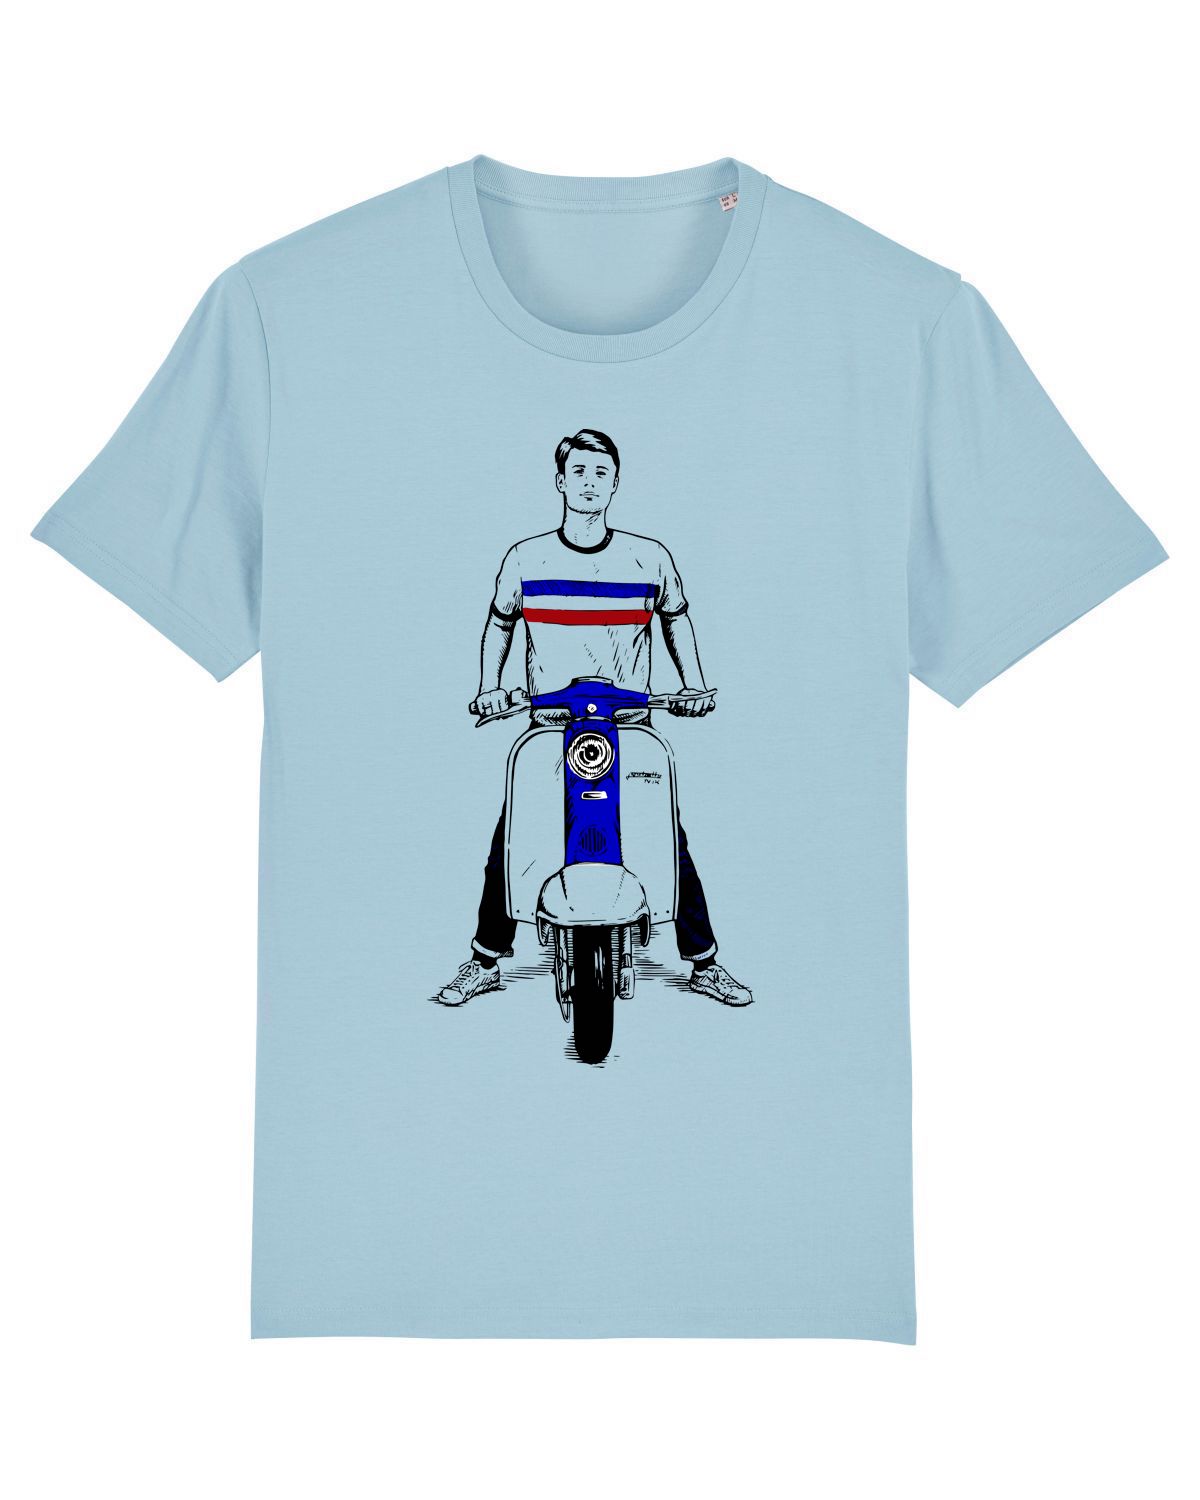 SCOOTER STYLE: T-Shirt Inspired by Scootering, Lambretta and Art Gallery Clothing.